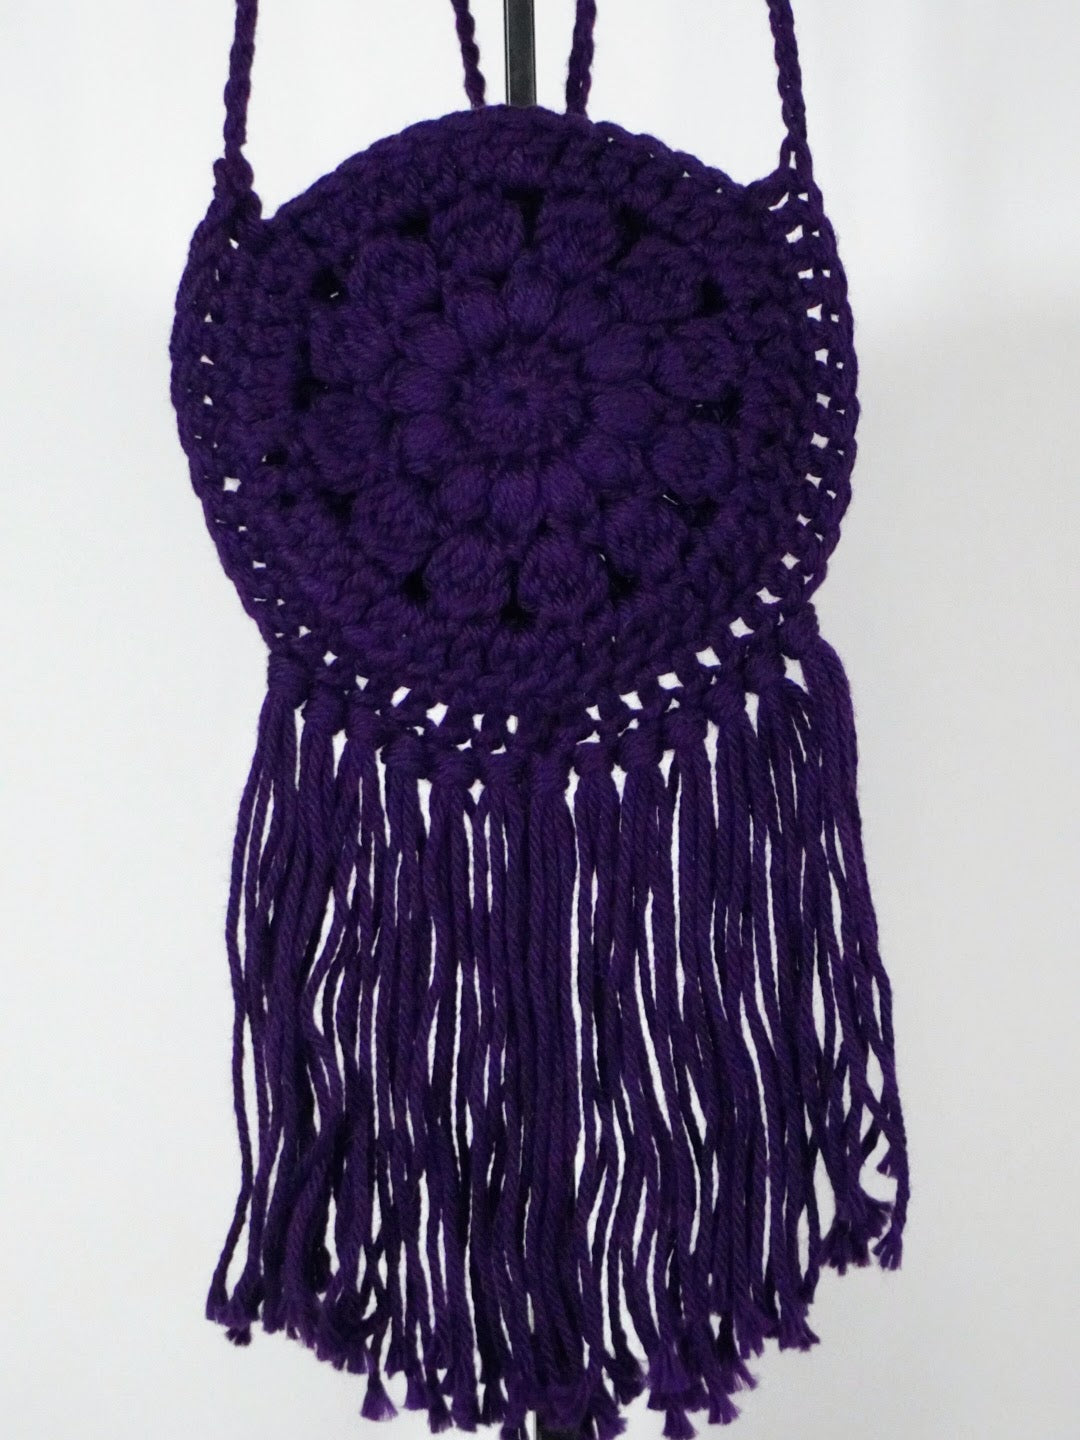 Handcrafted Crocheted Cotton 6-Inch Cross Body Toddlers Purse (6 inch fringe)